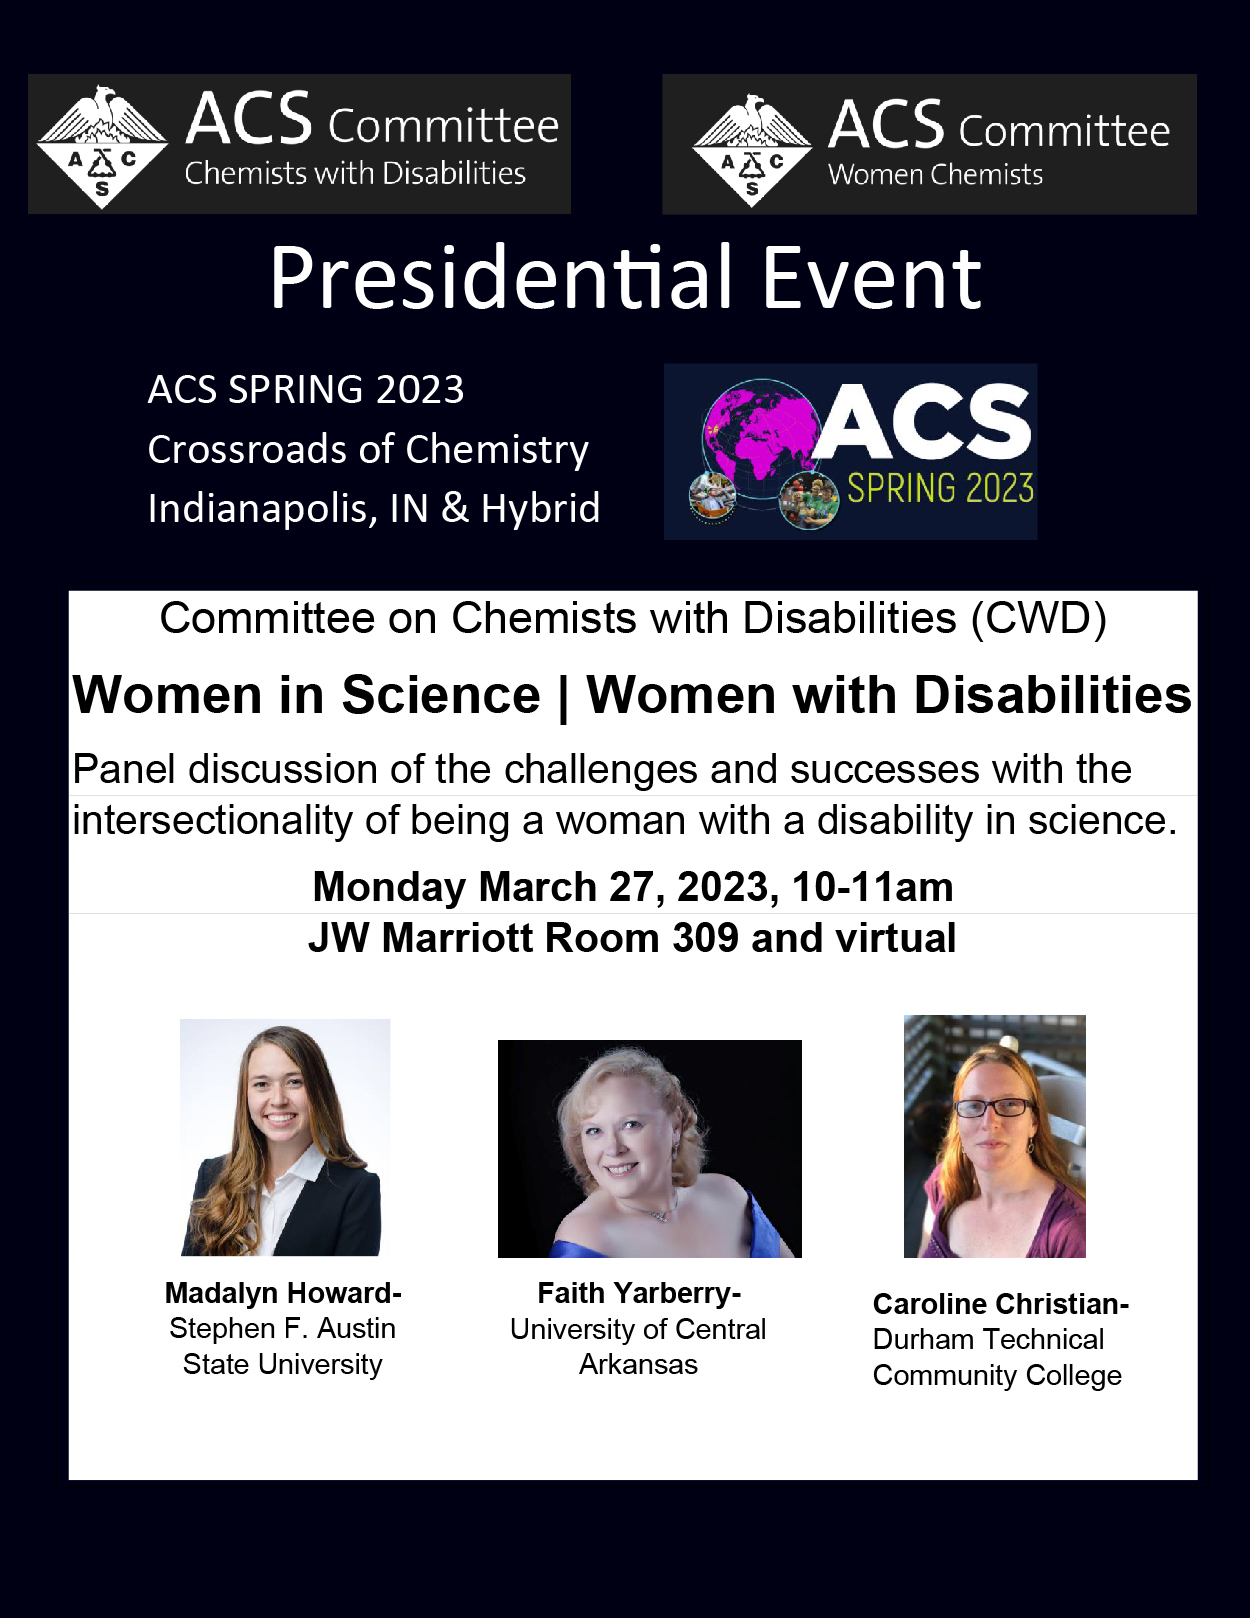 Women in Science | Women with Disabilities; Panel discussion of the challenges and successes with the intersectionality of being a woman with a disability in science.; 
Monday March 27, 2023, 10-11am; JW Marriott Room 309 and virtual 